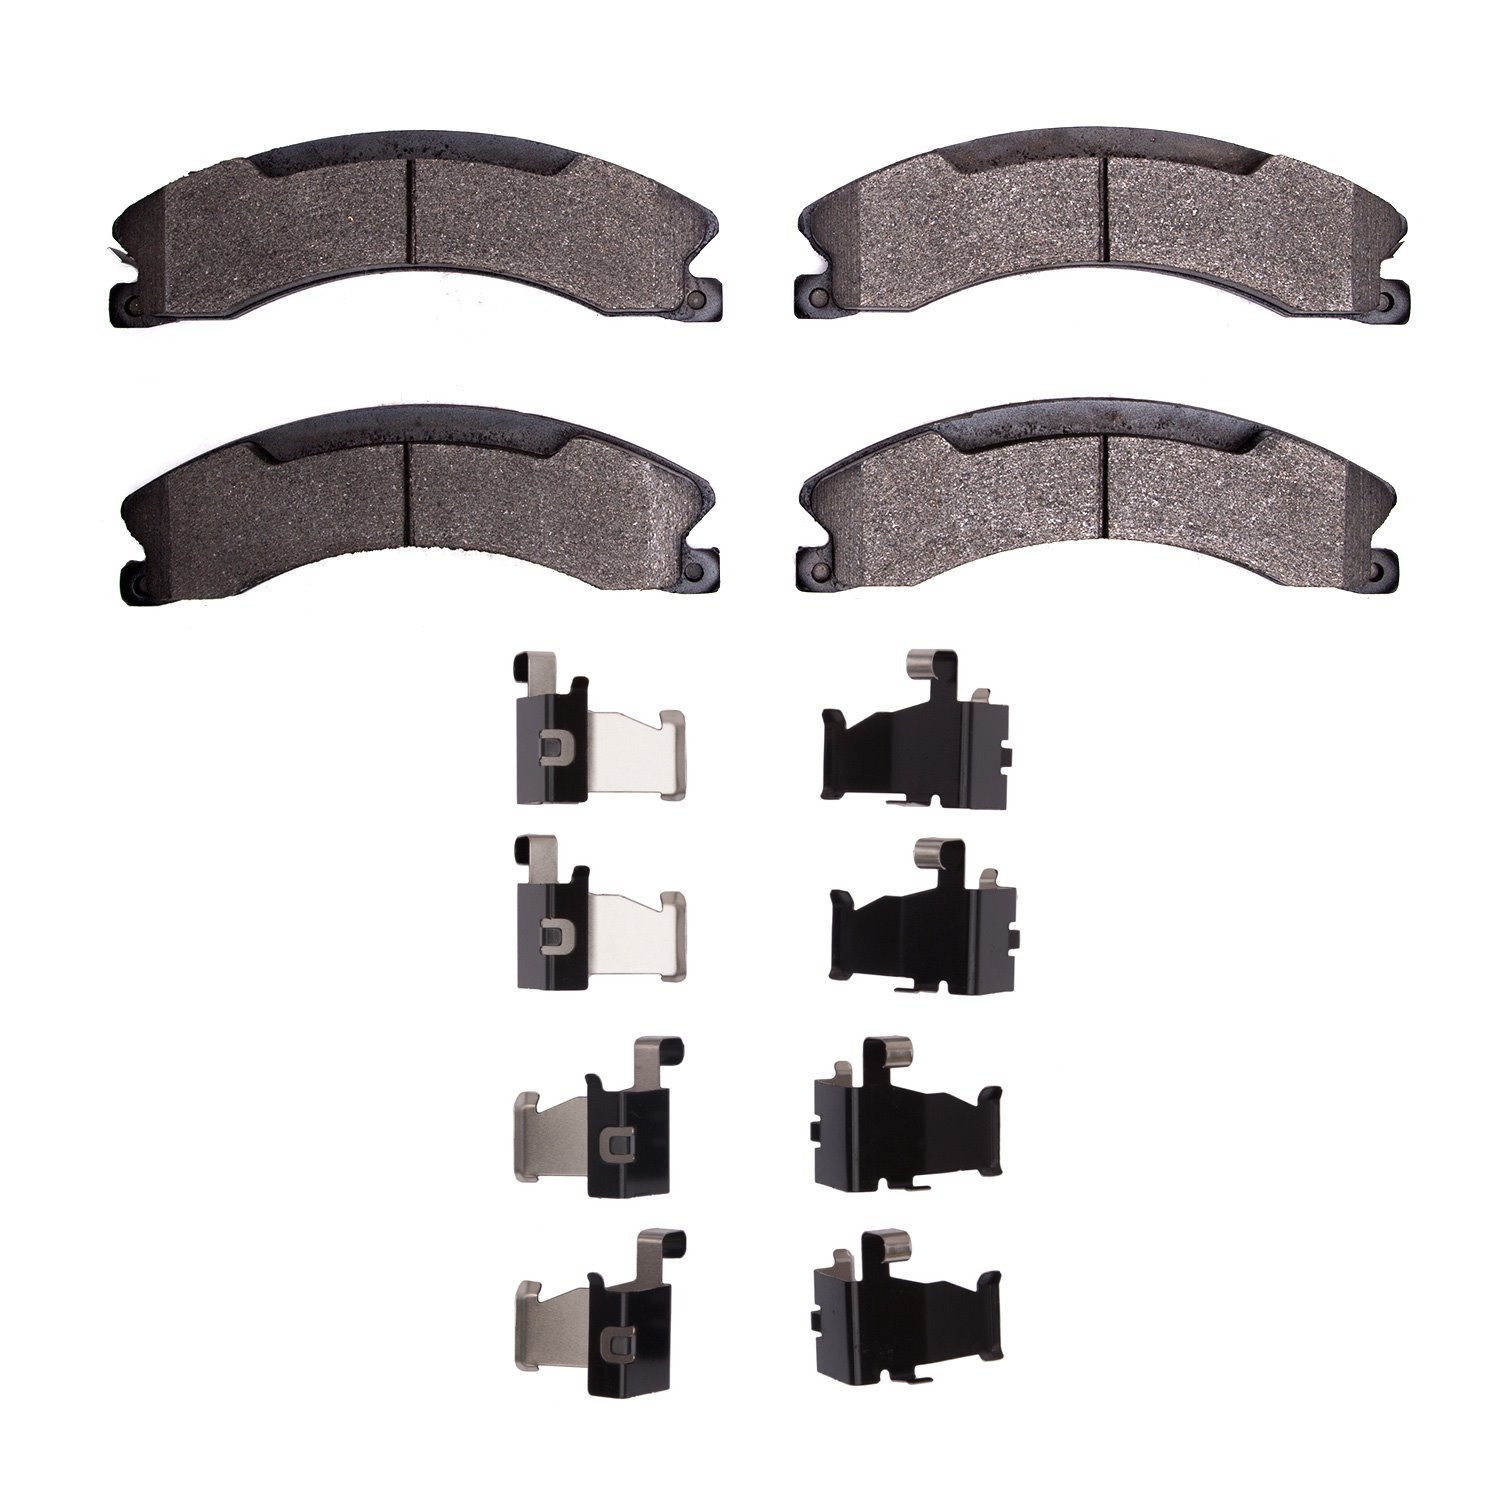 Performance Off-Road/Tow Brake Pads & Hardware Kit, Fits Select Fits Multiple Makes/Models, Position: Front & Rear